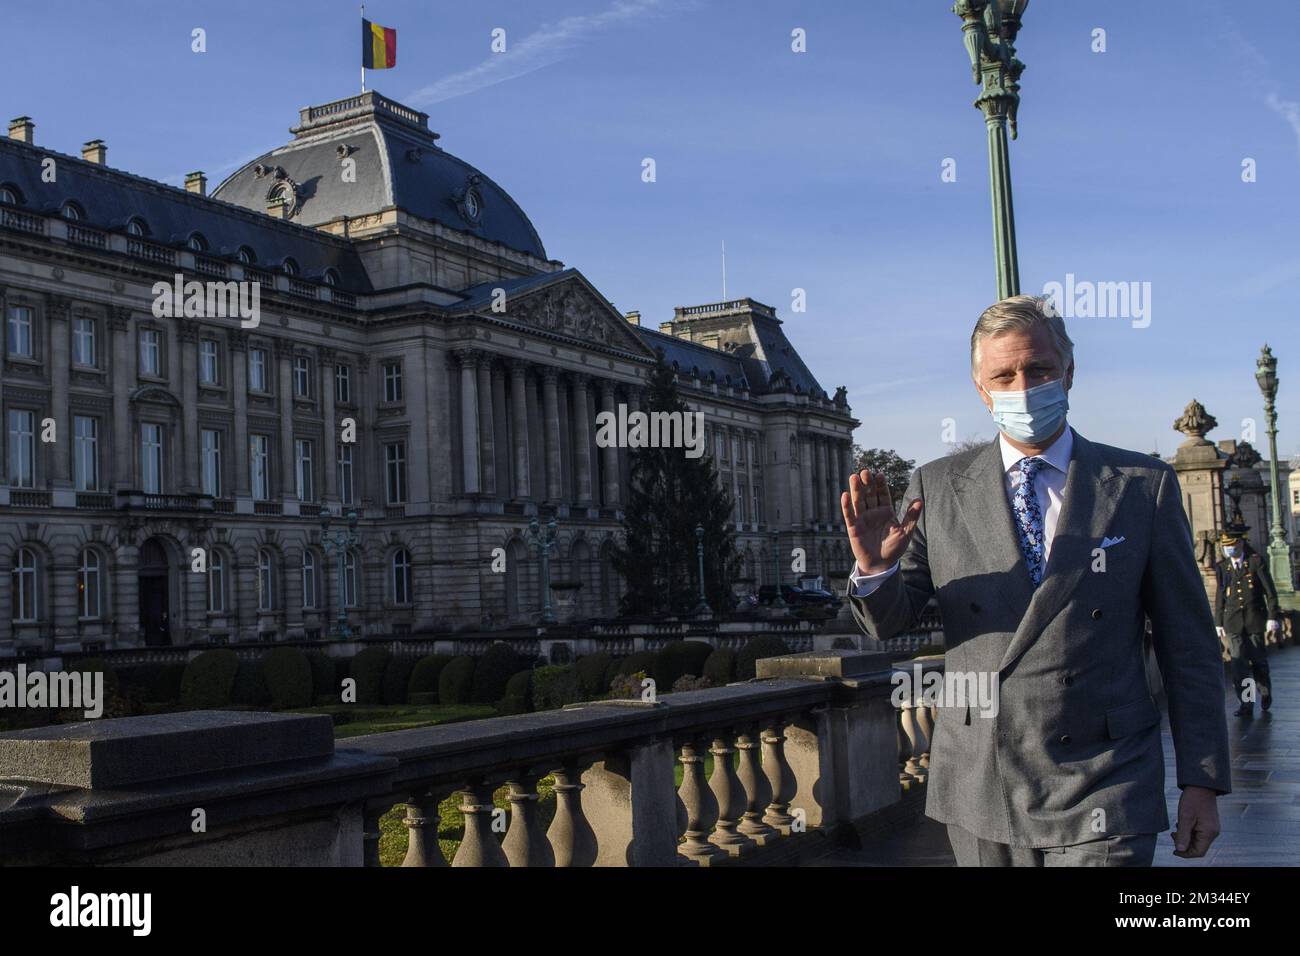 Brussels, Belgium - December 16 : His Majesty the King Philippe photographed in front of the royal palace, before the award ceremony of the Francqui-Collen Prize. His Majesty the King presents the Prix Francqui-Collen 2020 in biological and medical science to Professor CÃ©dric BLANPAIN of the UniversitÃ© Libre de Bruxelles (ULB) and Professor Bart LOEYS of the Universiteit Antwerpen, at the Palais des AcadÃ©mies in Brussels. December 16, 2020 in Brussels, Belgium, 16/12/2020 ( Photo by Christophe Licoppe / Photonews  Stock Photo